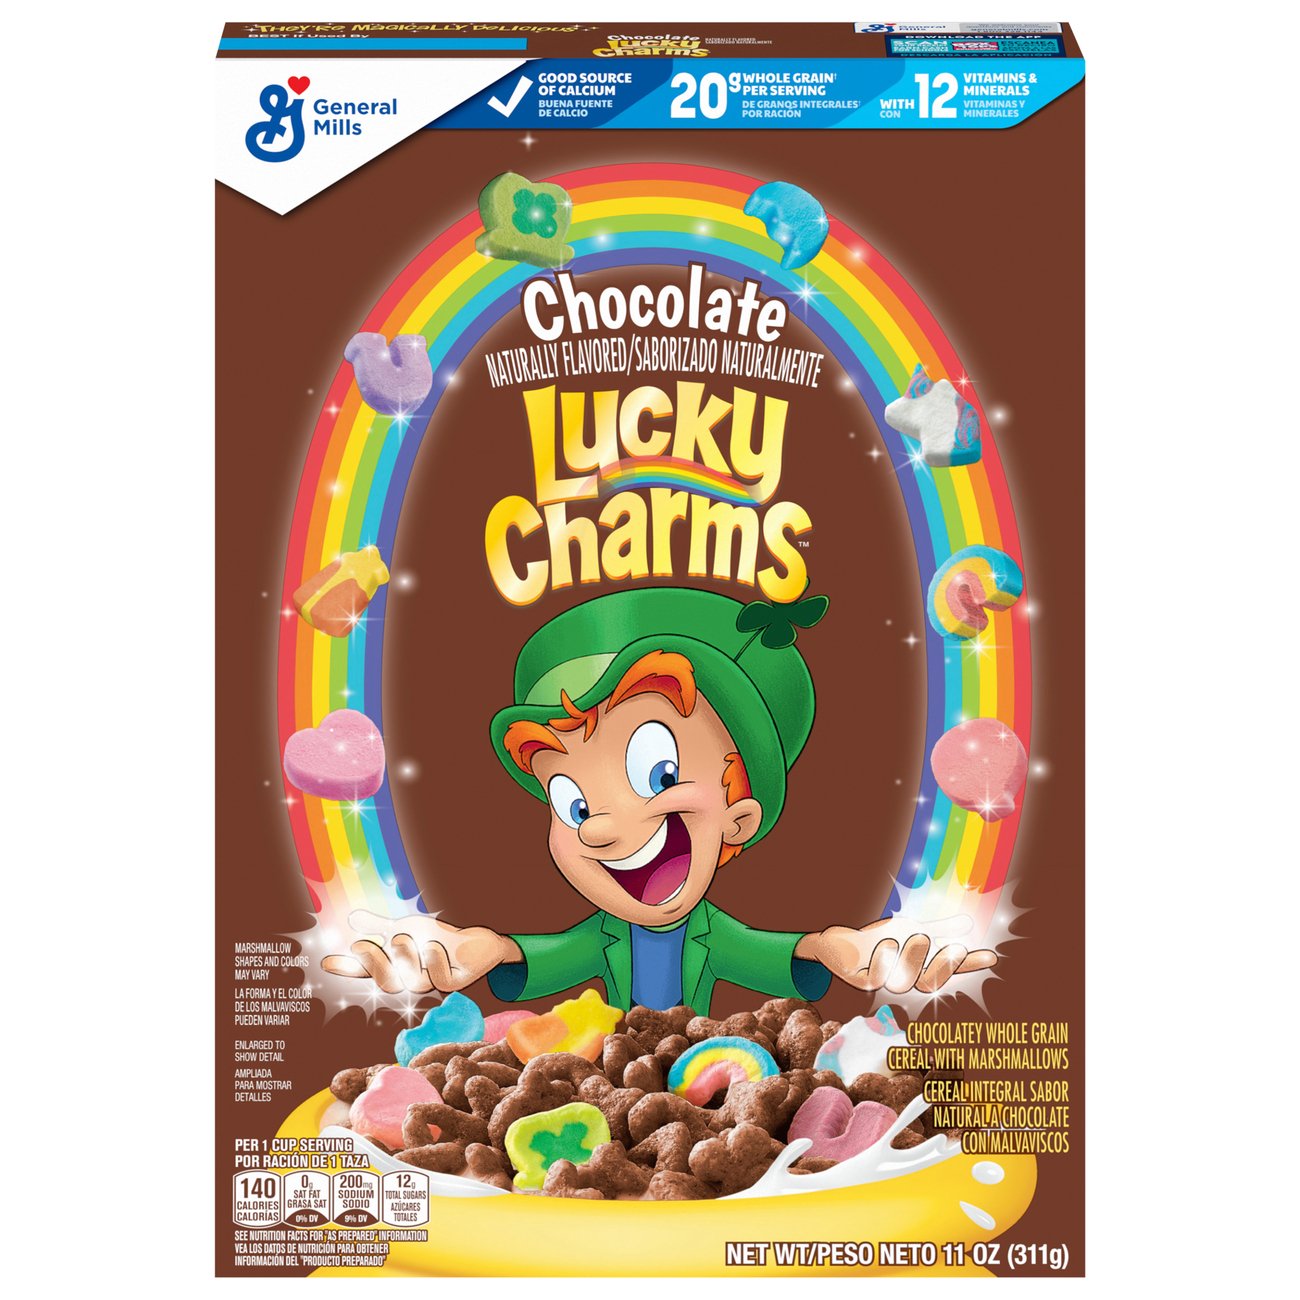 chocolate lucky charms commercial